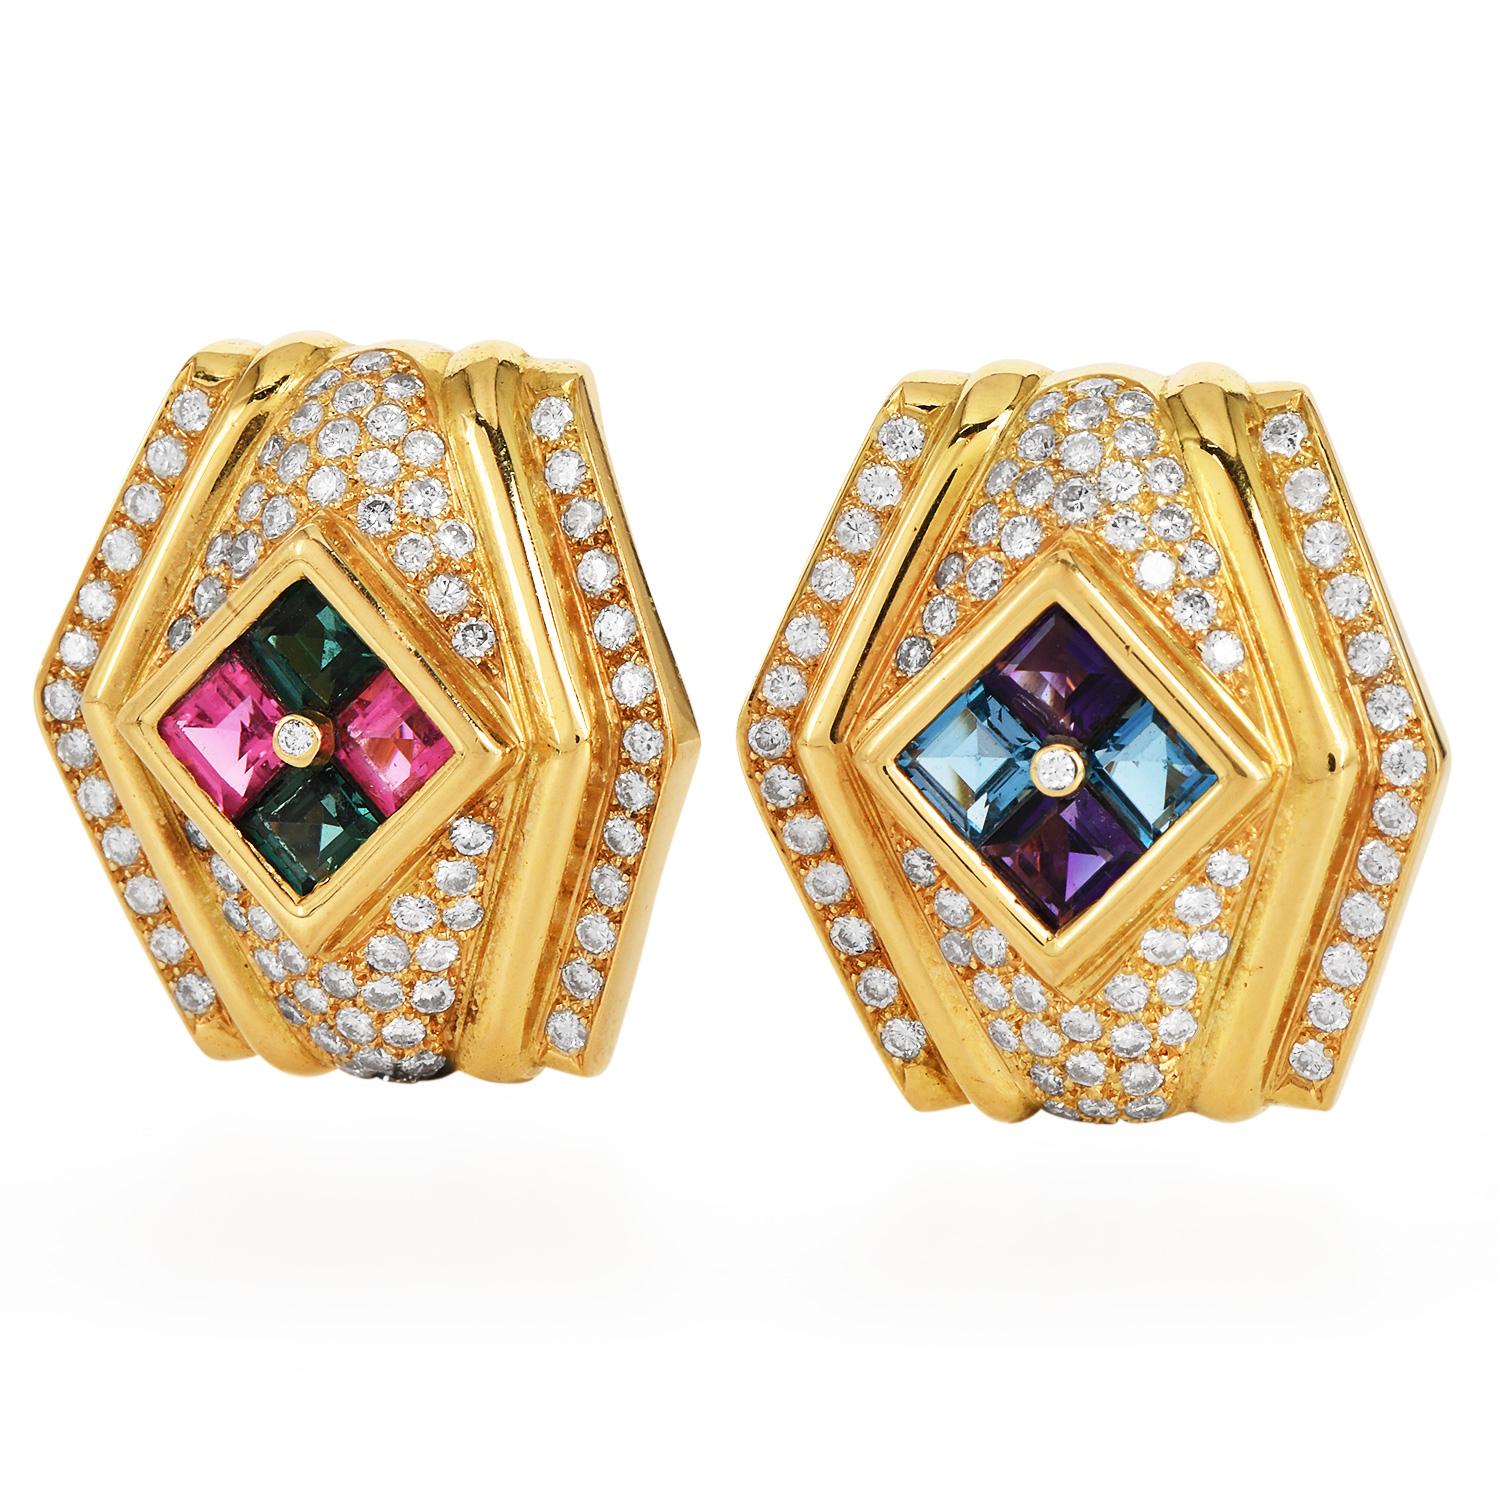  These lovely, large 1980s Estate earrings are made in 18k yellow gold. Centered with a pair of Asscher-cut purple amethyst and blue topaz, and a pair of pink and green tourmaline weighing approx. 8.00 carats in total.

An array of full-cut round